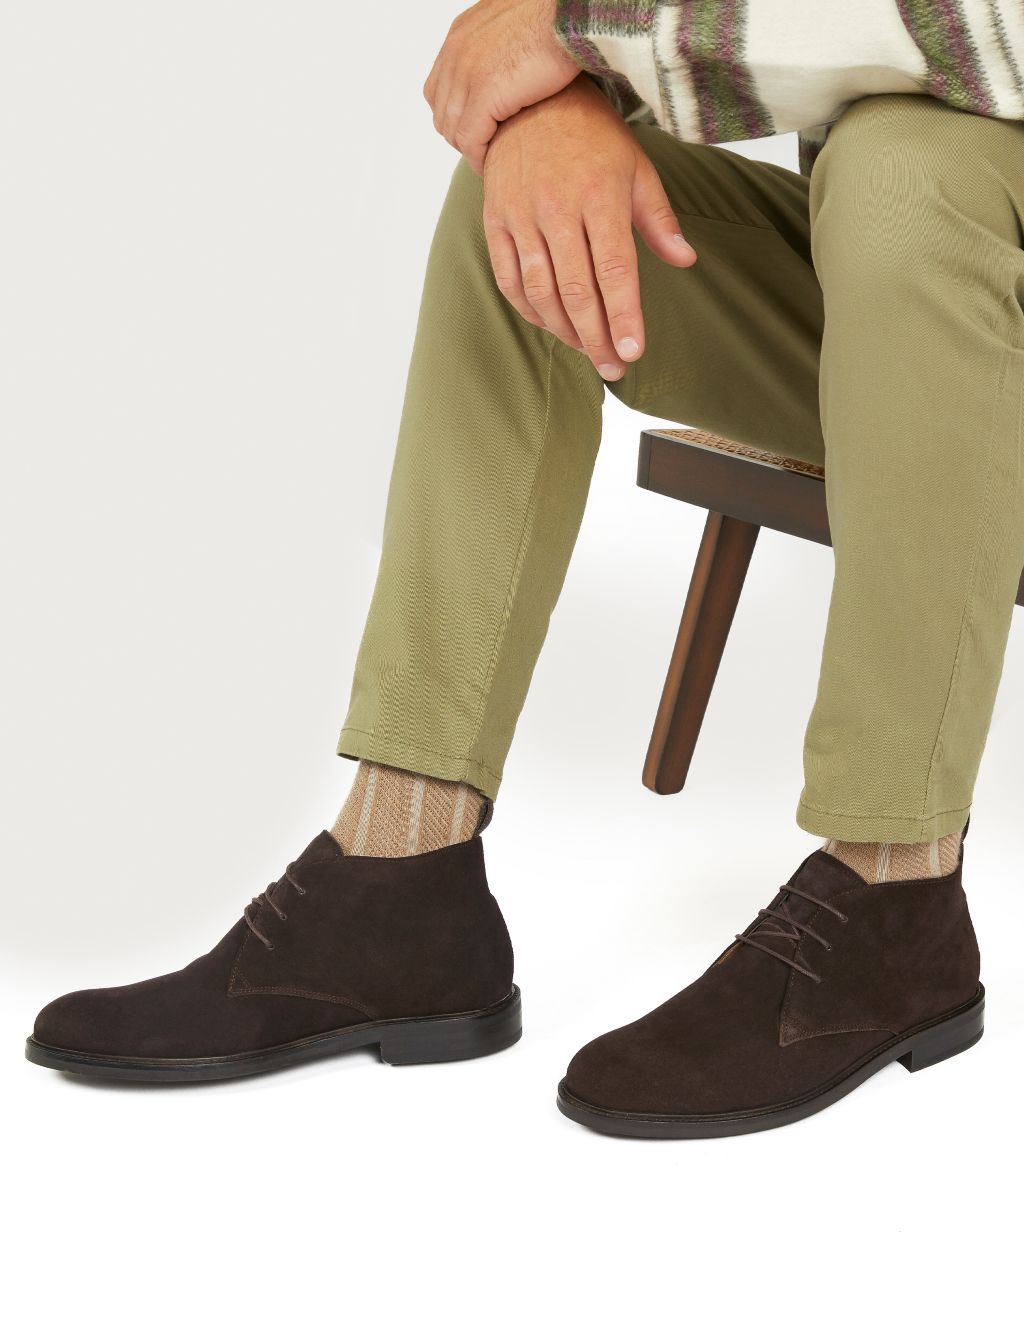 Suede Pull-on Chukka Boots image 1